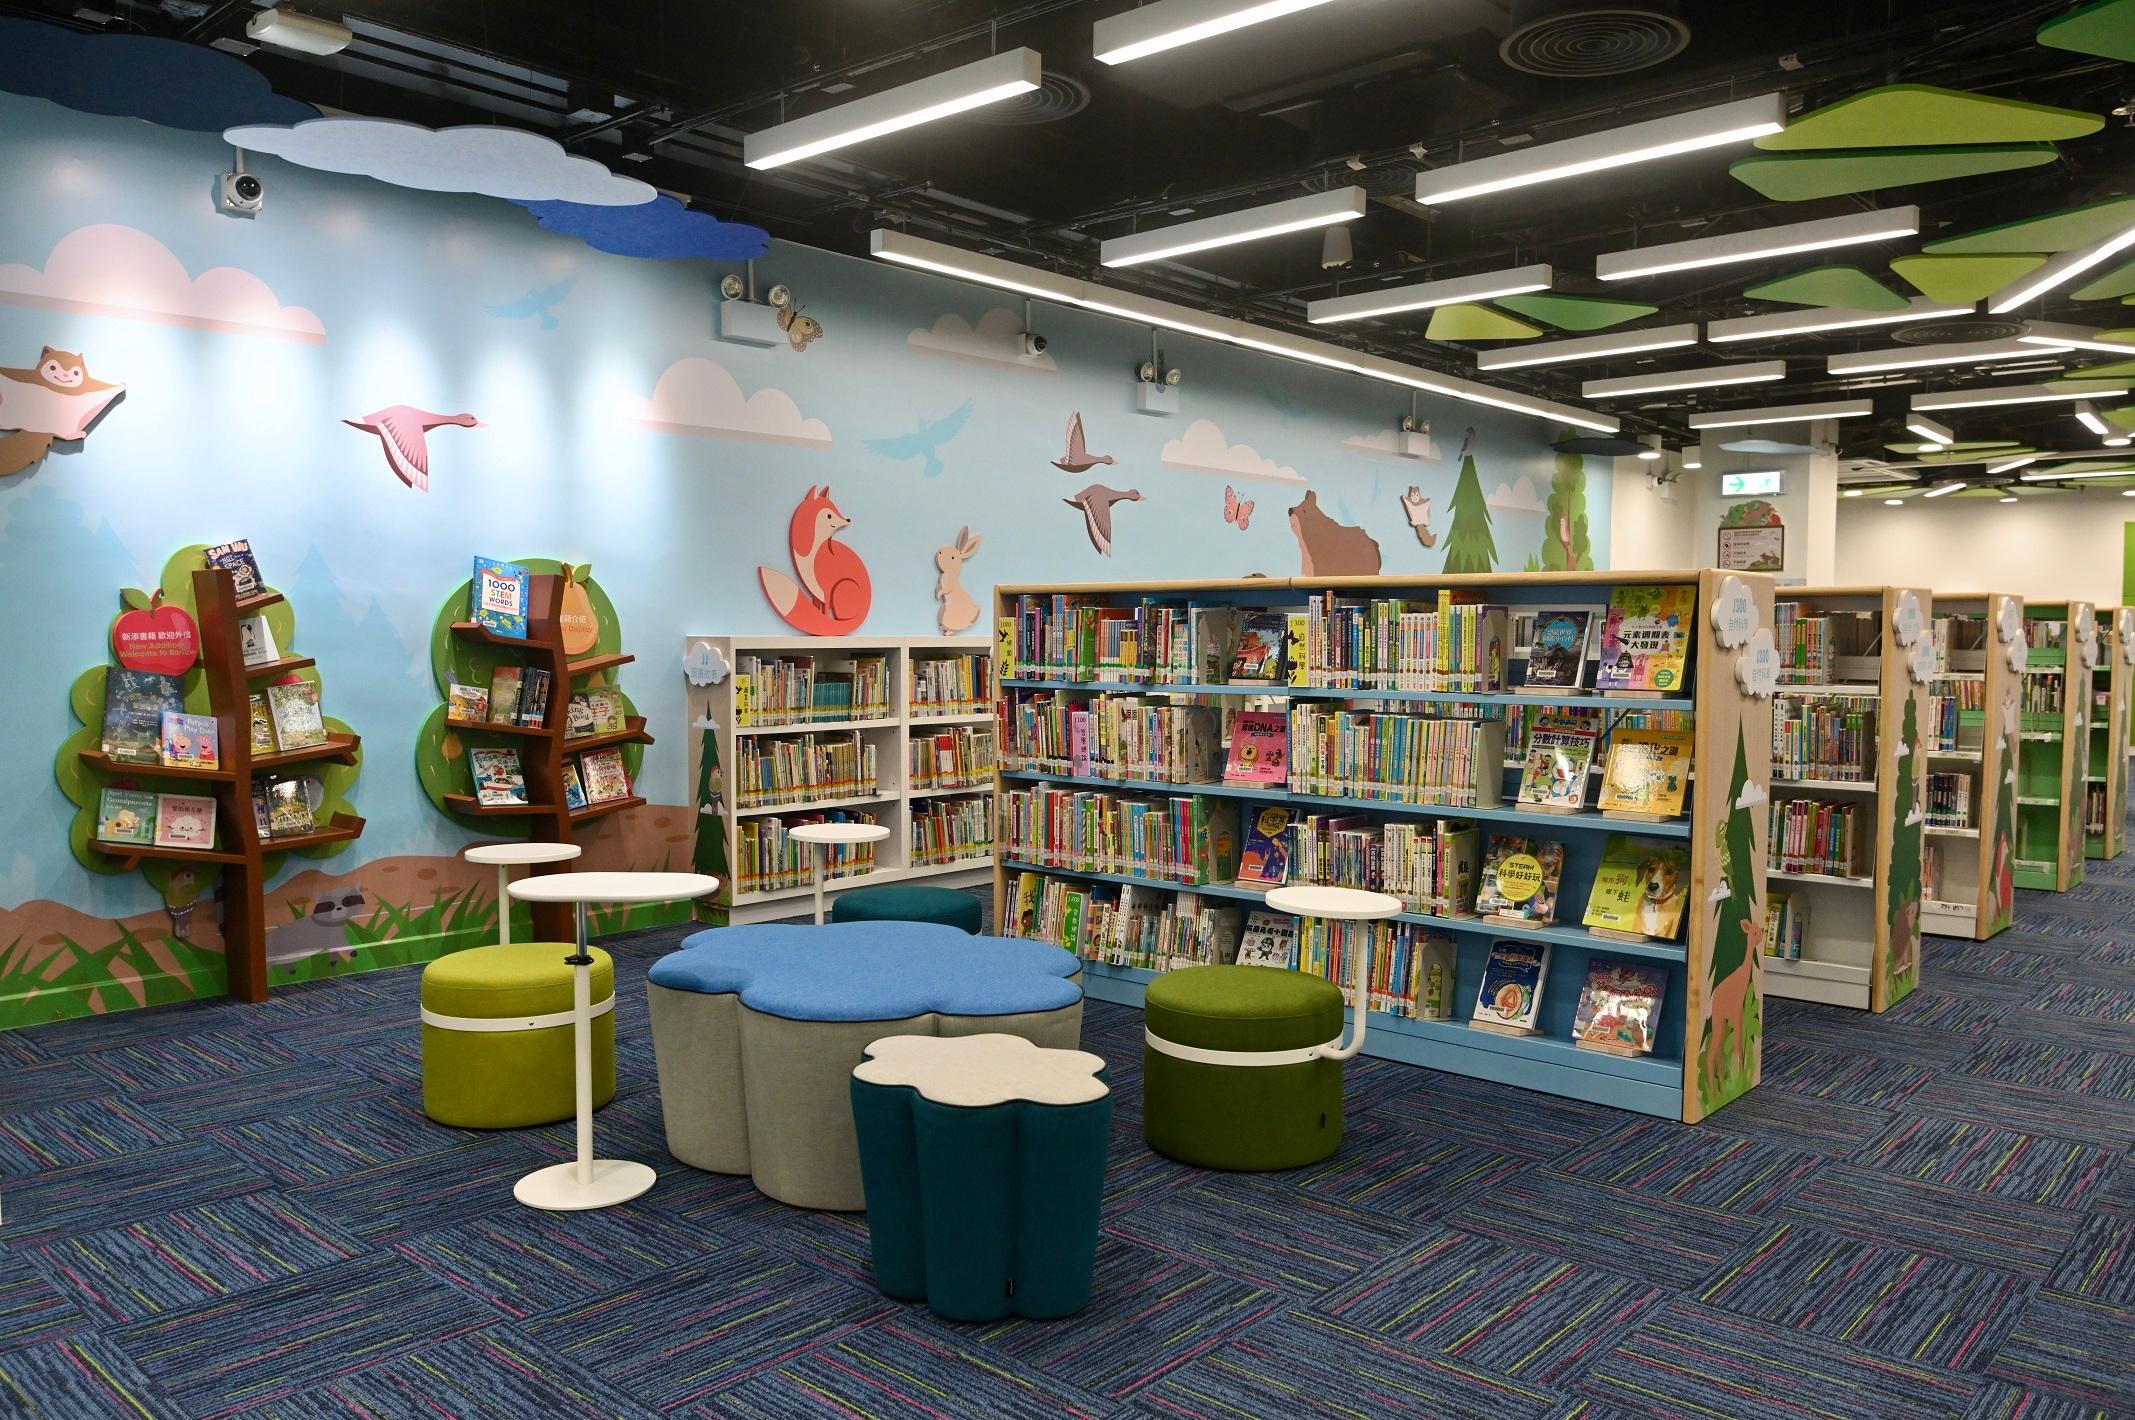 Fanling South Public Library will open at its new location at 9am on Tuesday (December 28). Photo shows the Children's Library of the new library.